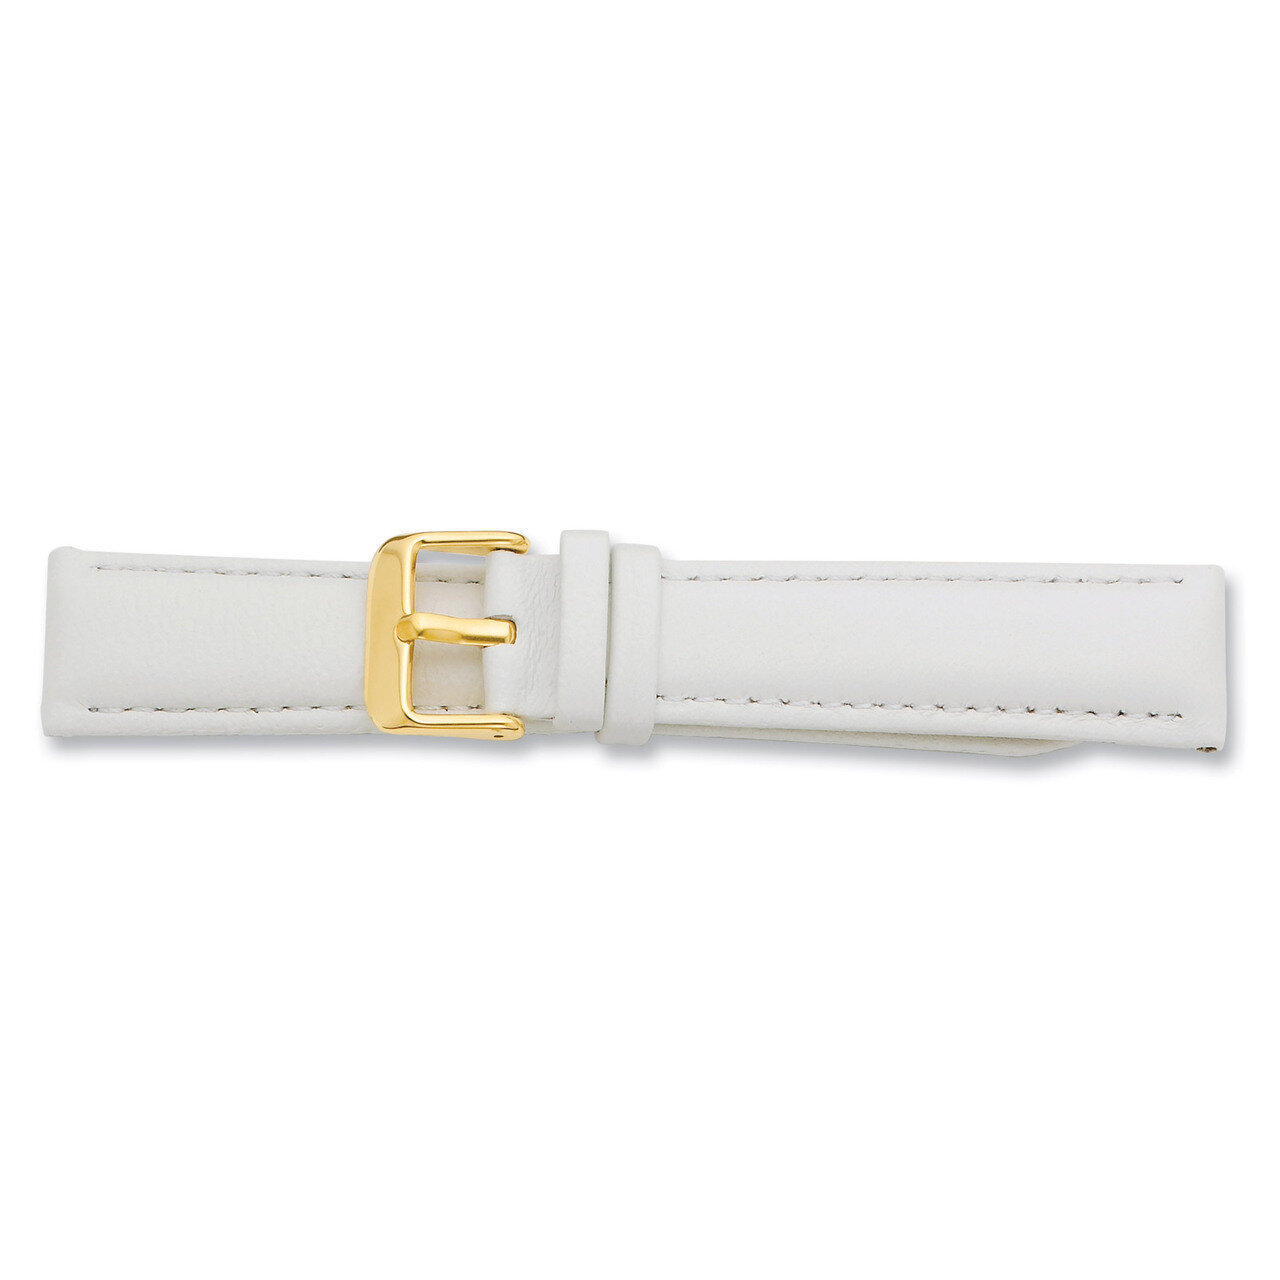 16mm White Glove Leather Buckle Watch Band 7.75 Inch Gold-tone BA197-16